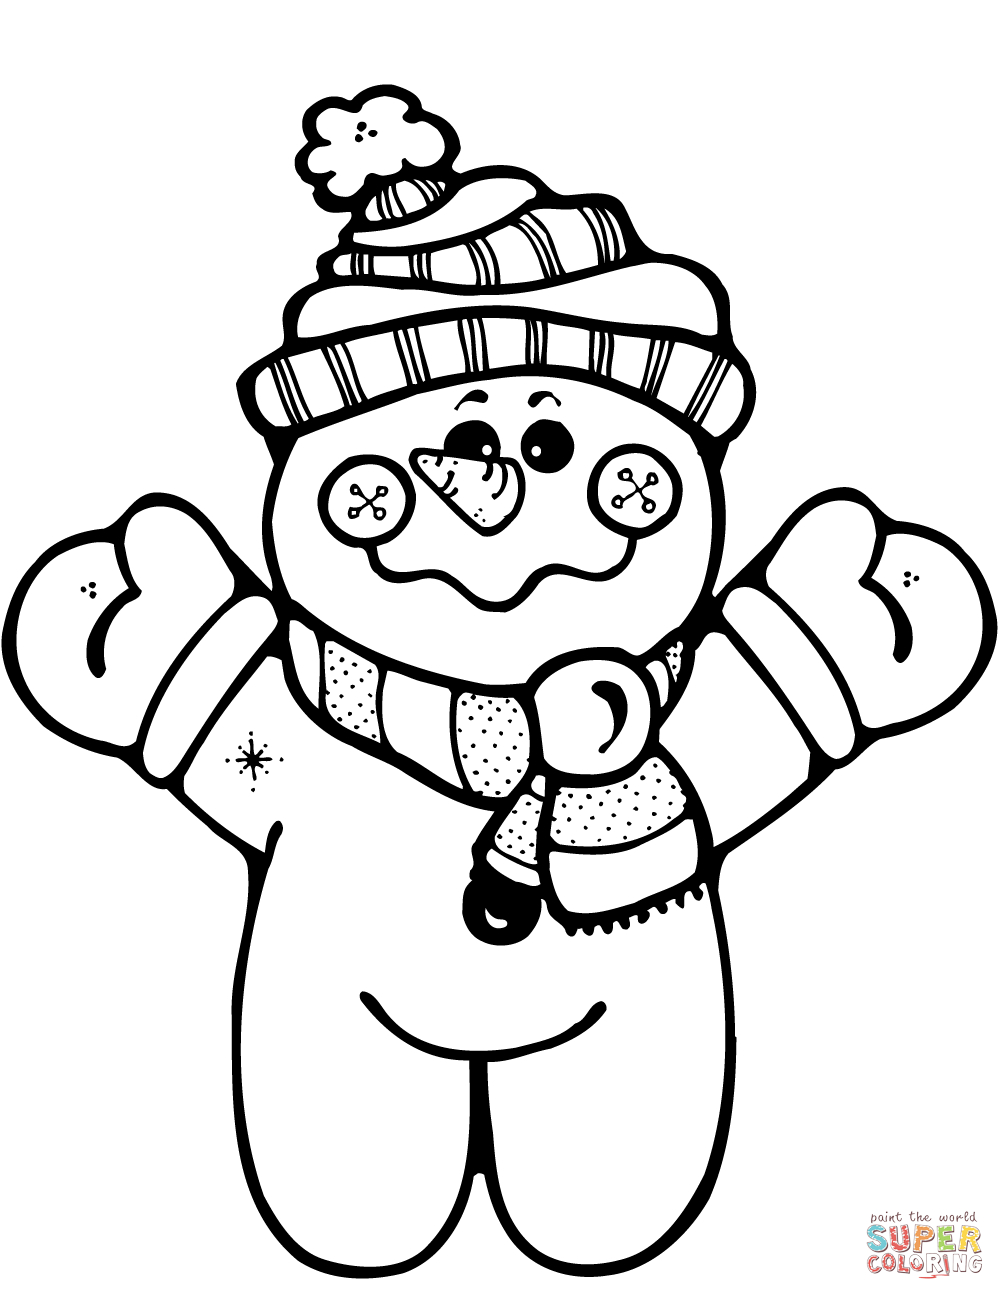 Snowmen Coloring Pages Happy Snowman Coloring Page Free Printable Coloring Pages